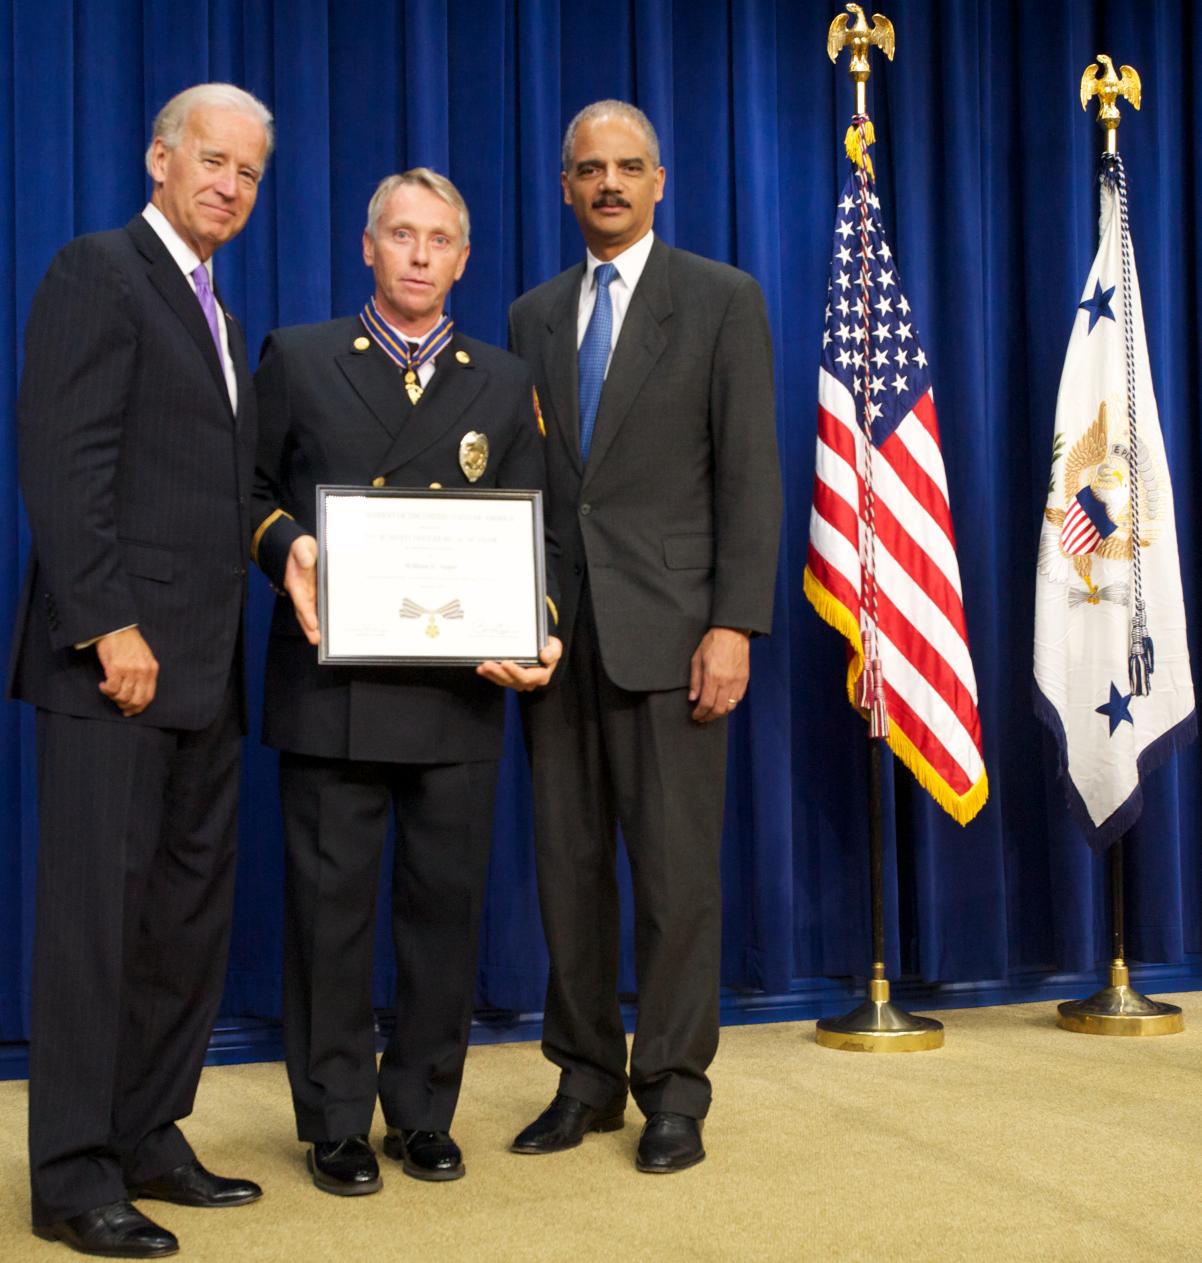 Three men standing in front of flags on a stage and facing the camera. The man in the middle is wearing an officer uniform and holding a Medal of Valor award plaque.